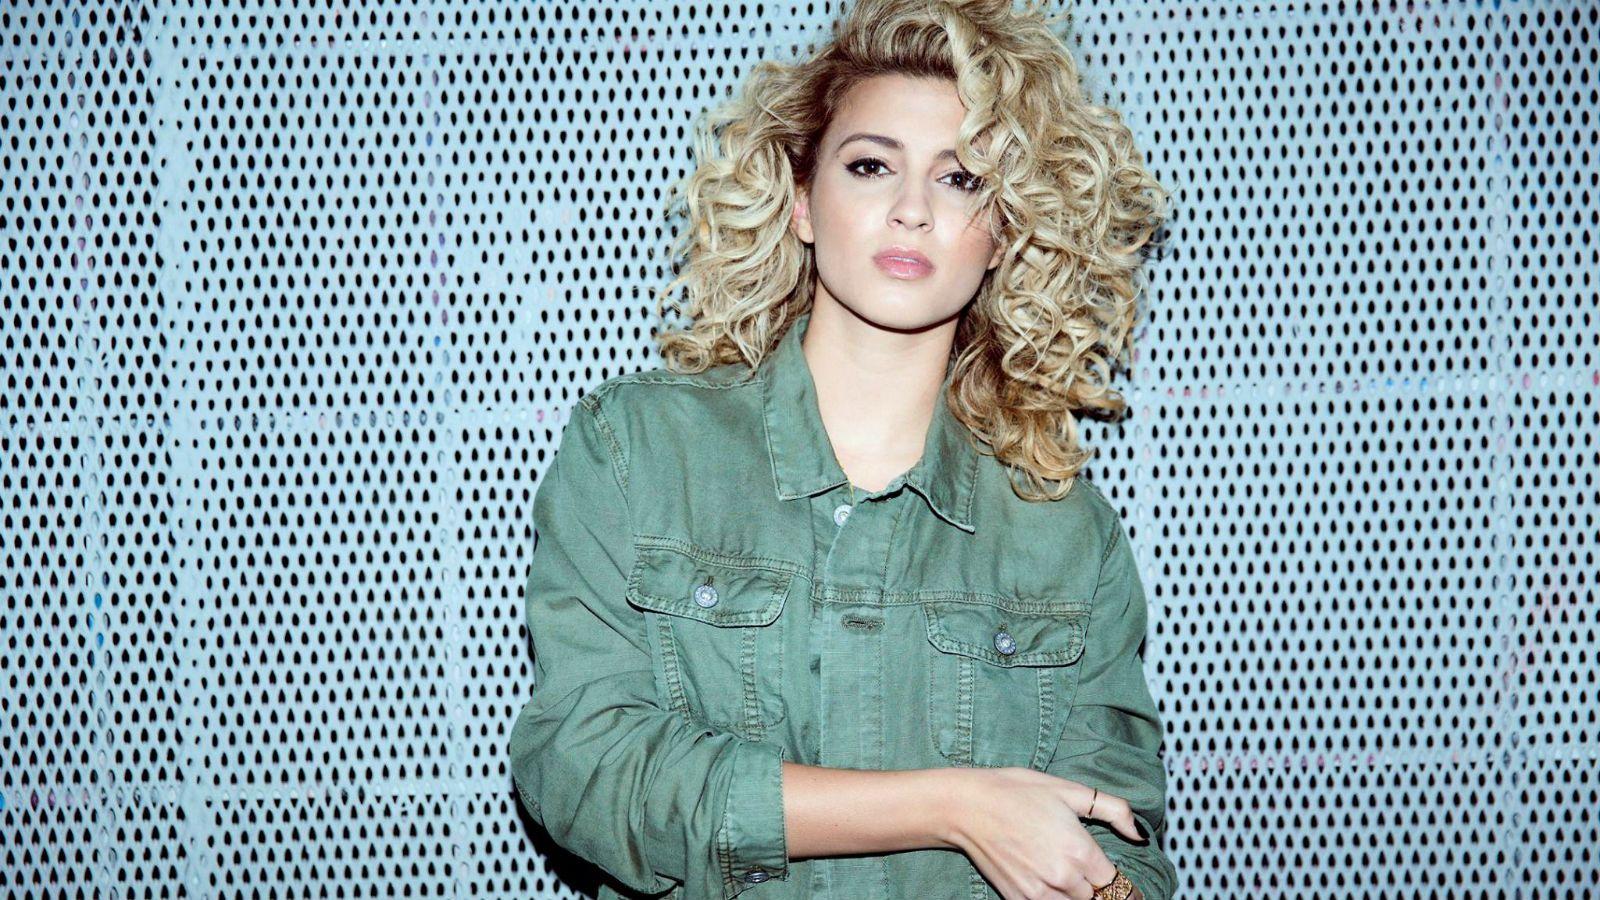 12 Reasons Why We Can't Help But Love Tori Kelly.